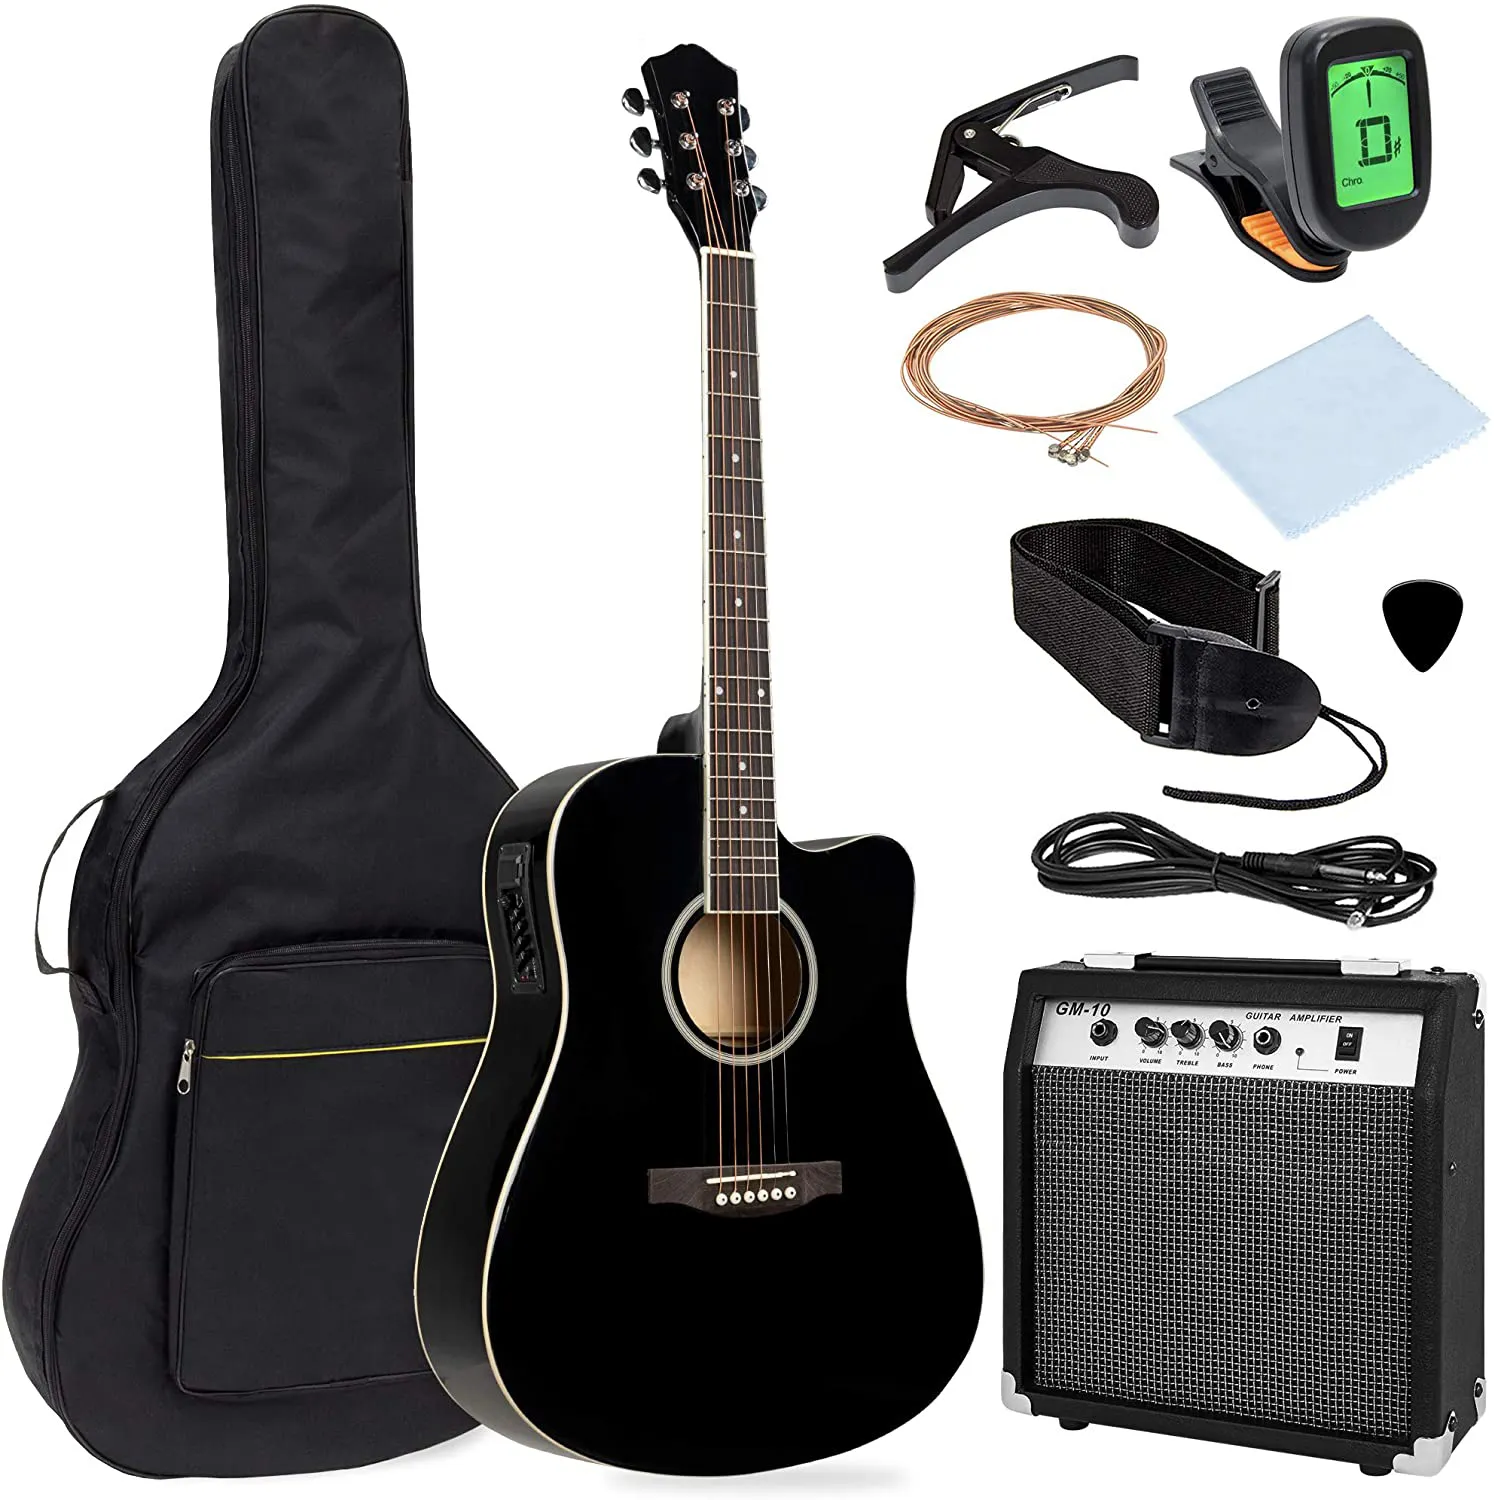 ALL IN ONE ACOUSTIC-ELECTRIC GUITAR KIT